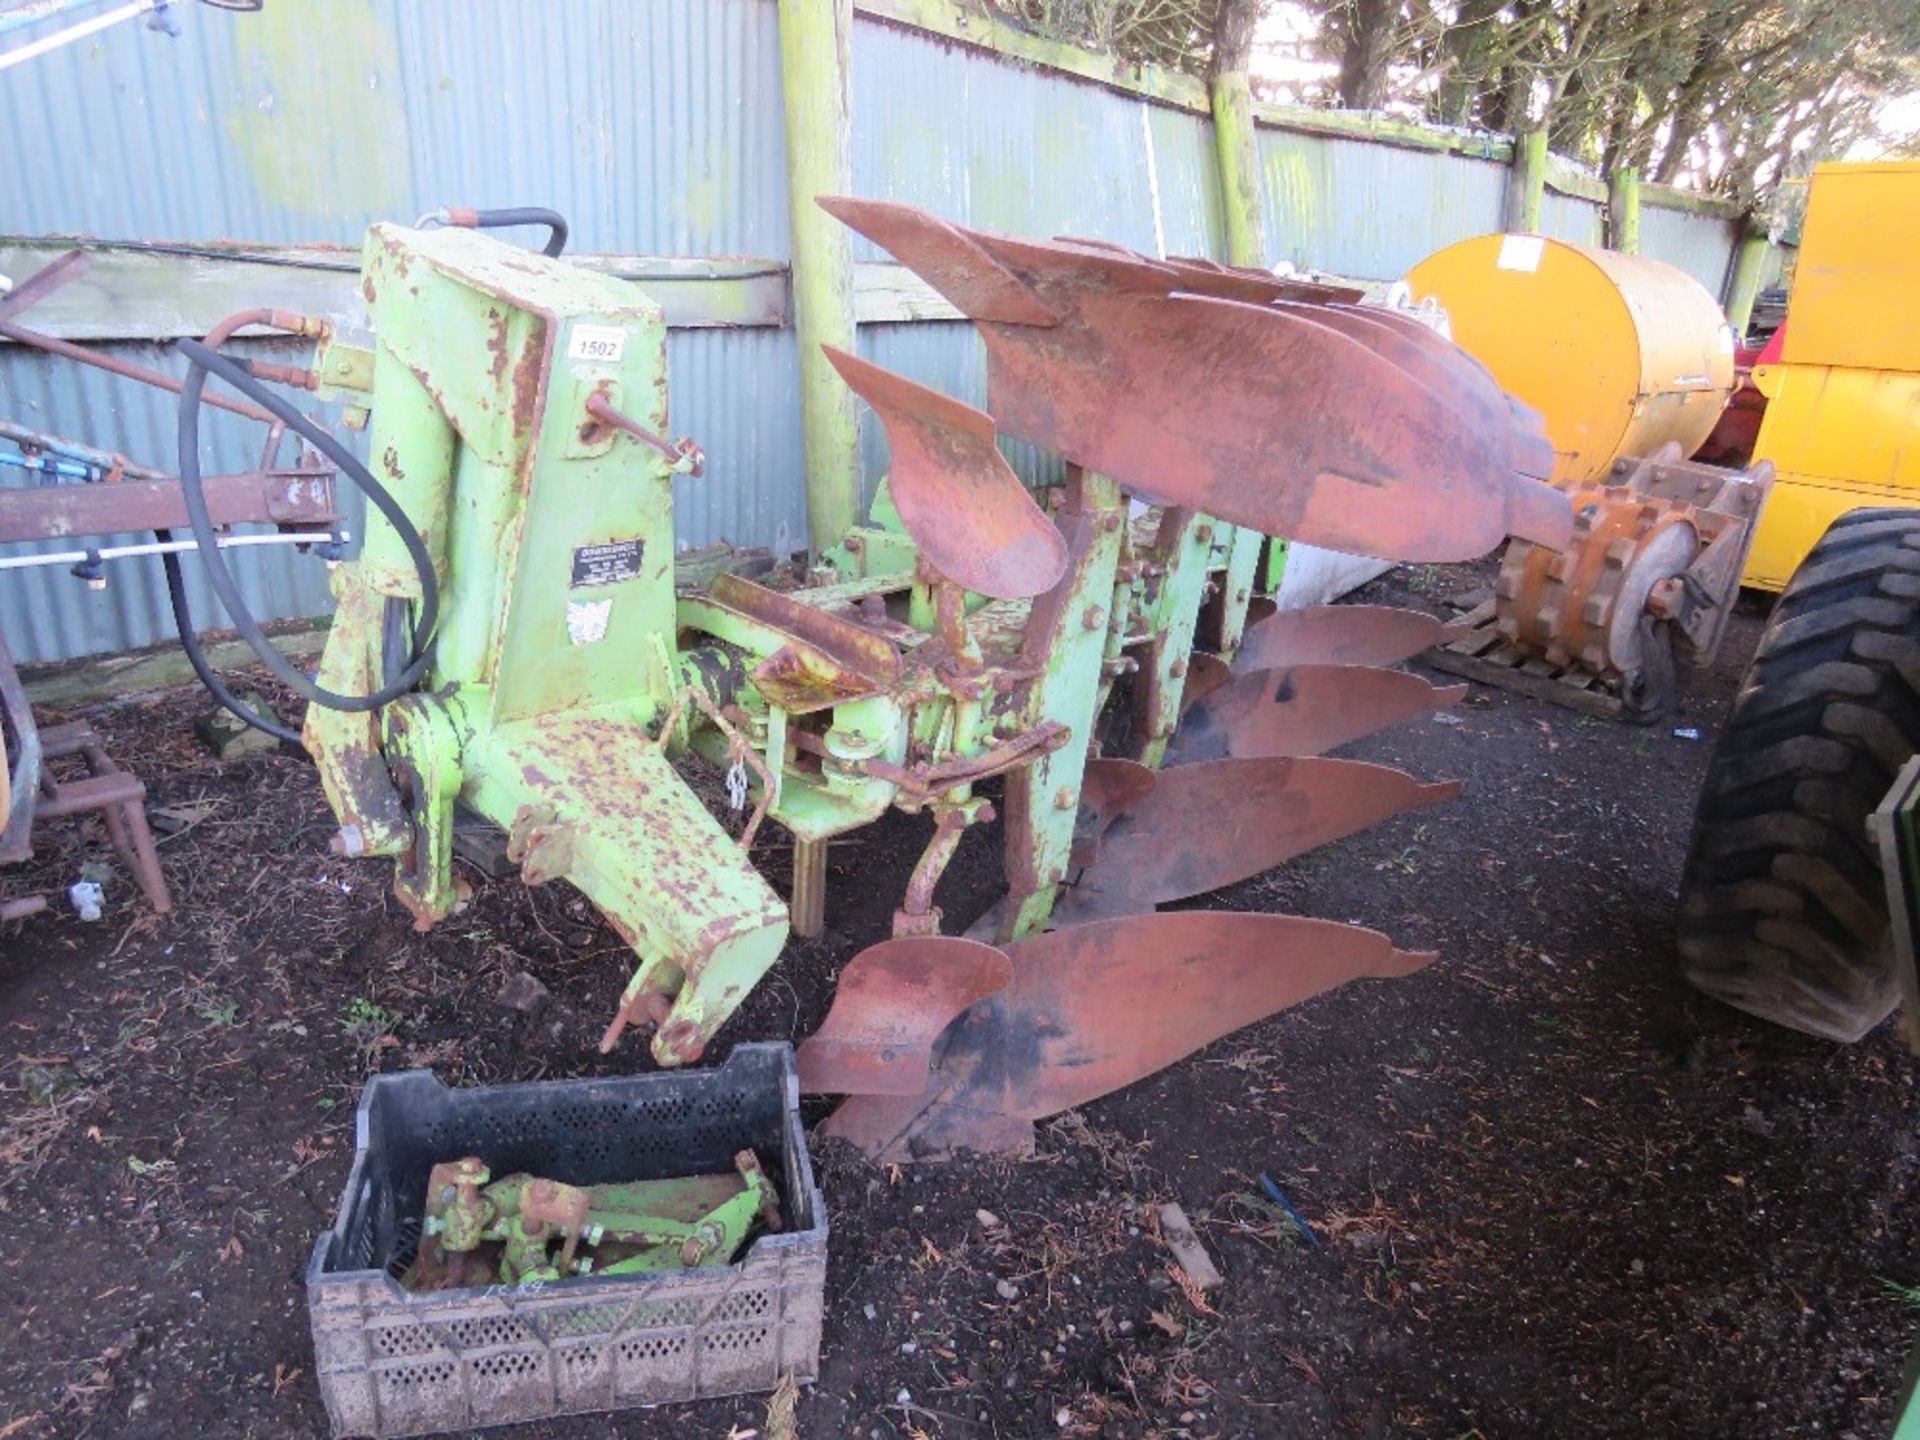 DOWDESWELL 4 FURROW REVERSIBLE PLOUGH WITH A BOX OF SPARES, DIRECT FROM SMALL HOLDING. THIS LOT